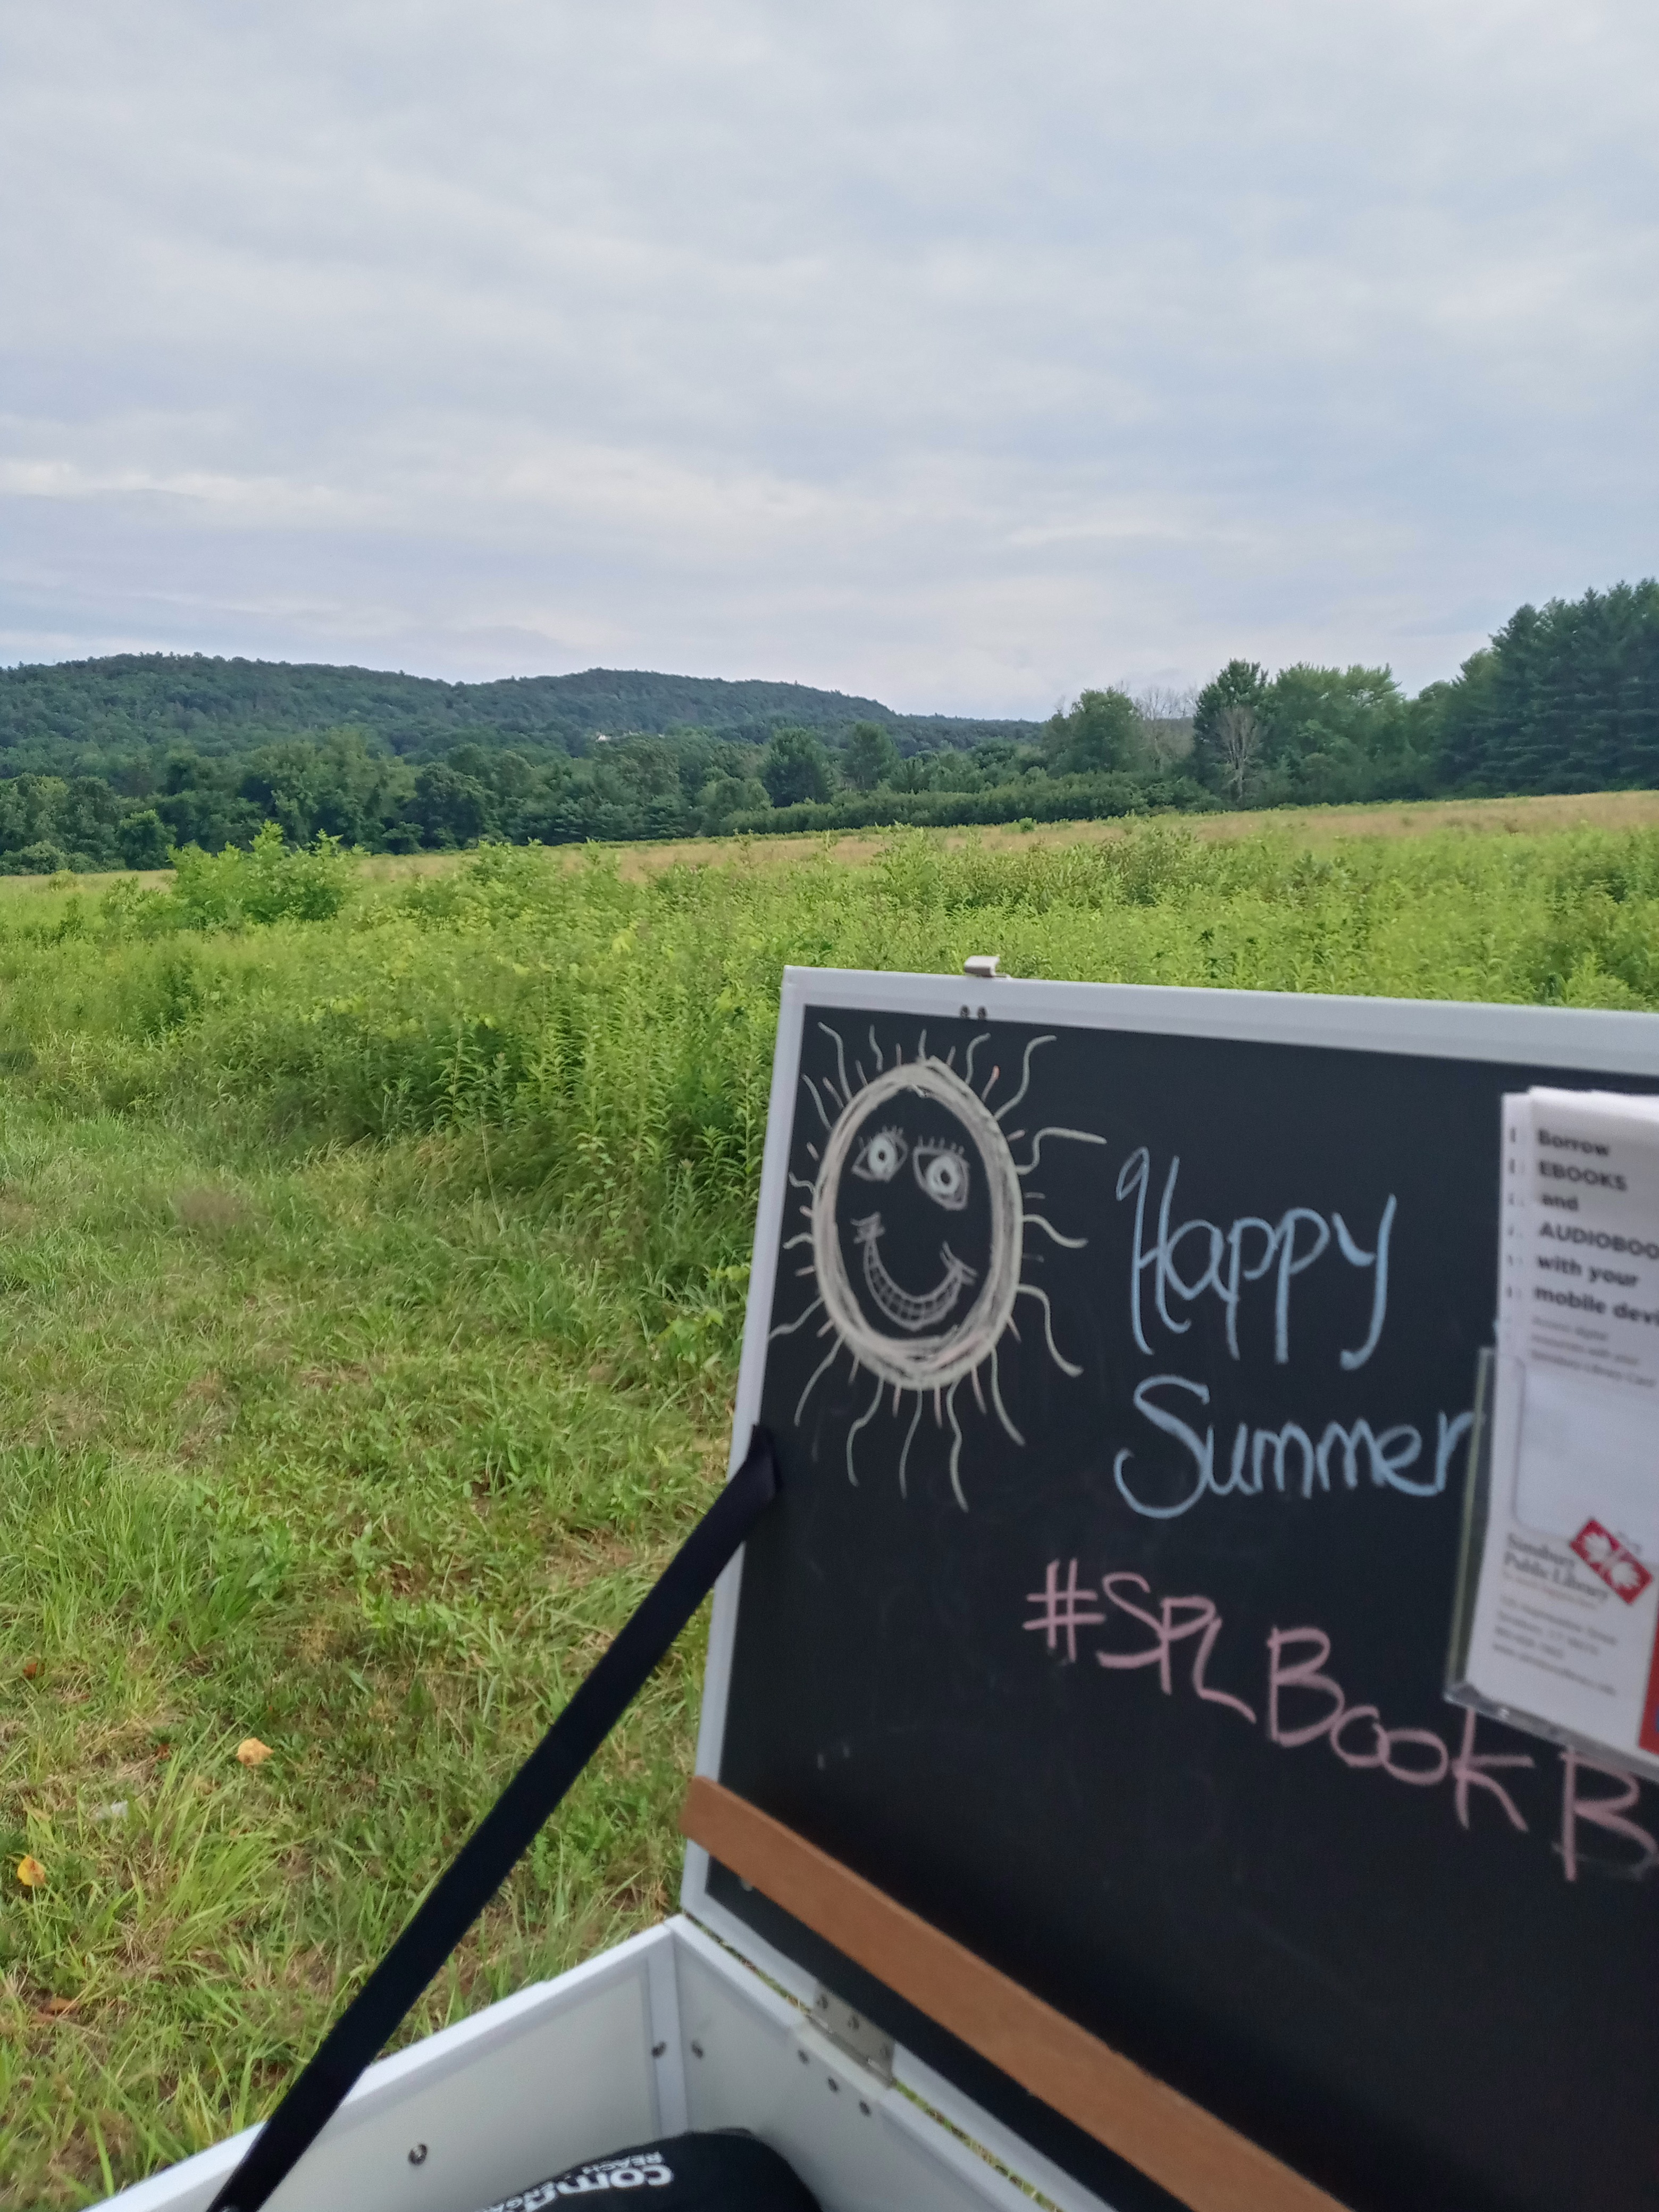 Simsbury Public Library Book Bike with Happy Summer on chalkboard and view of Simsbury fields